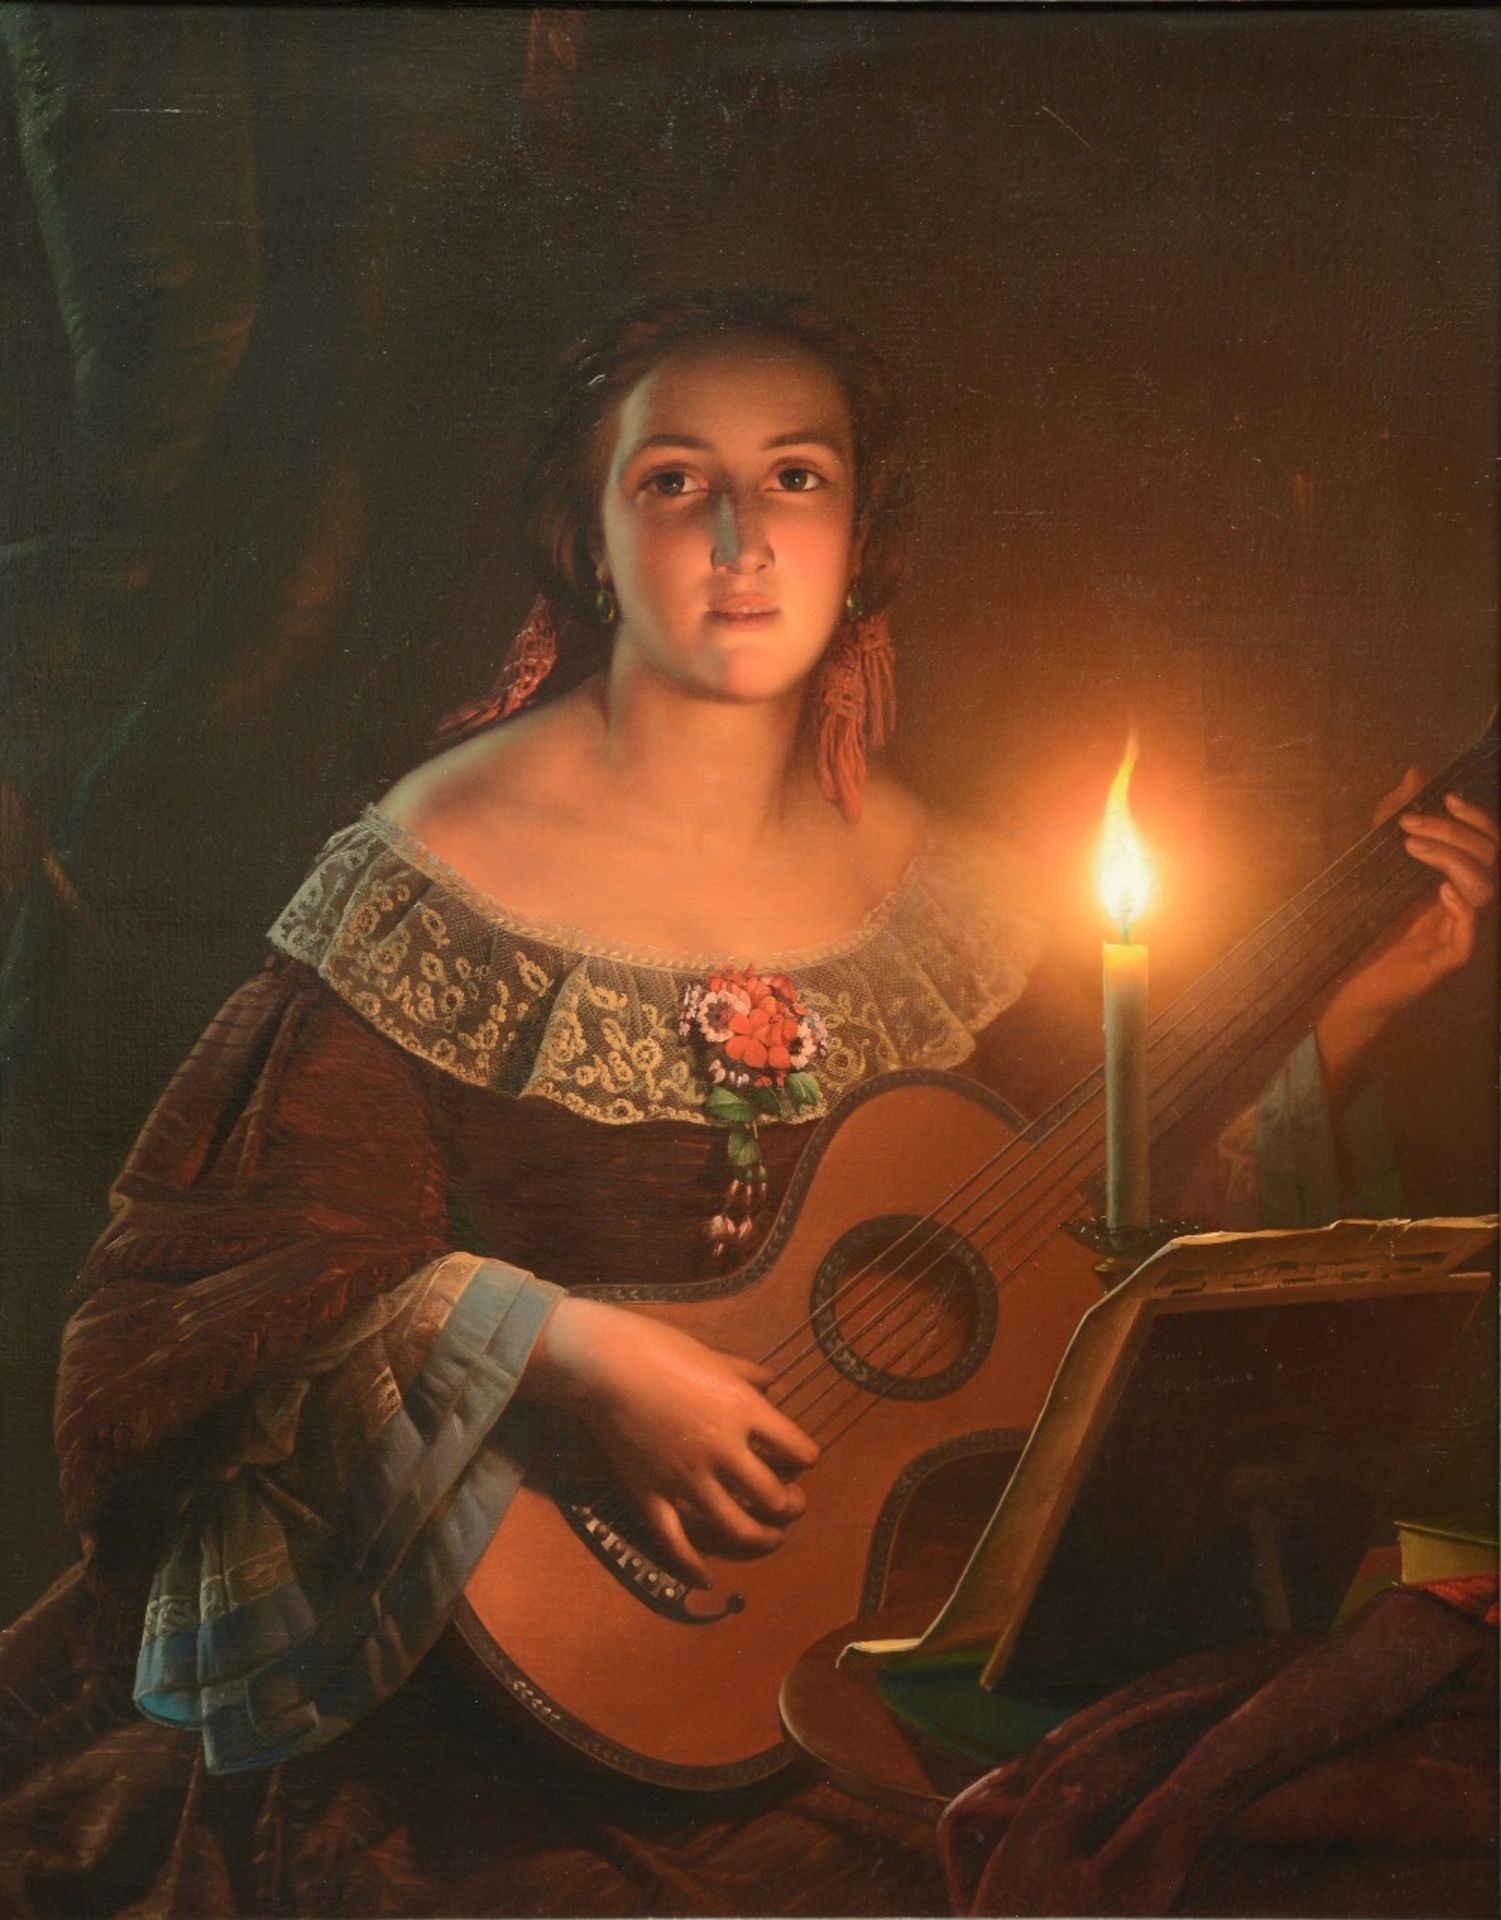 Unsigned (attr. to P. Van Schendel), a guitar playing girl in clair obscur, oil on canvas, last